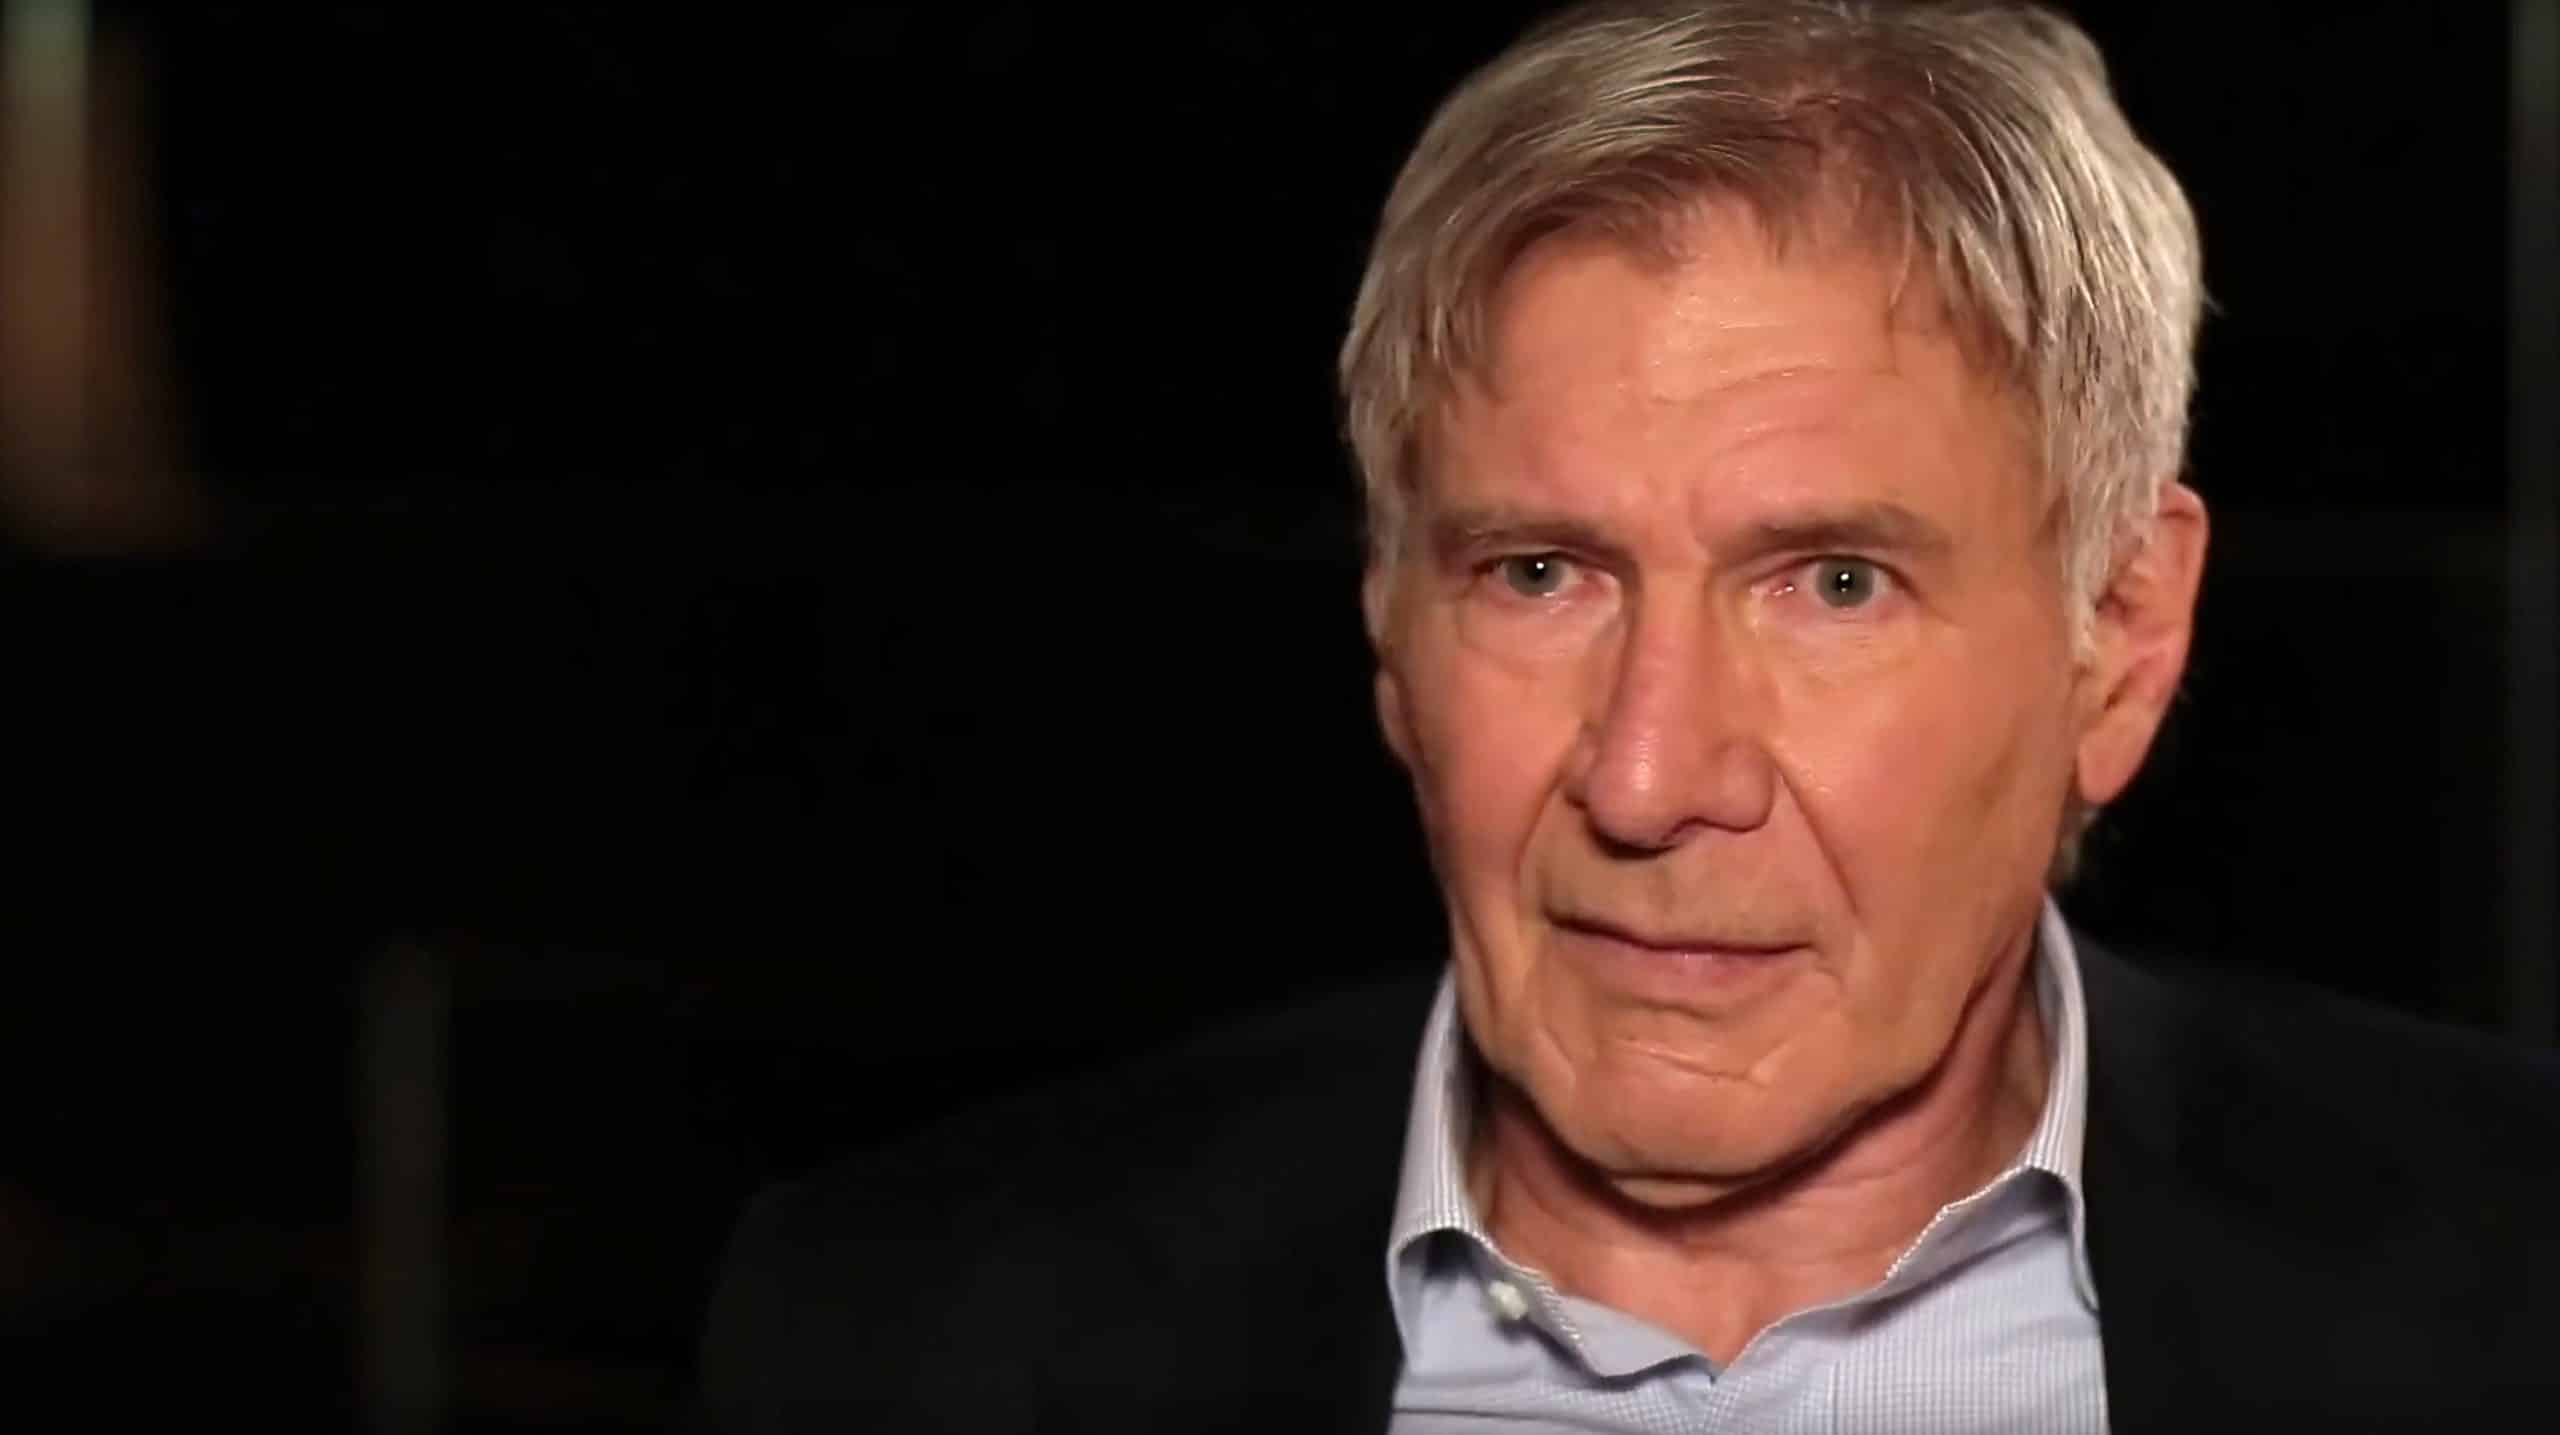 ALAN PAKULA: GOING FOR TRUTH, Harrison Ford, 2019